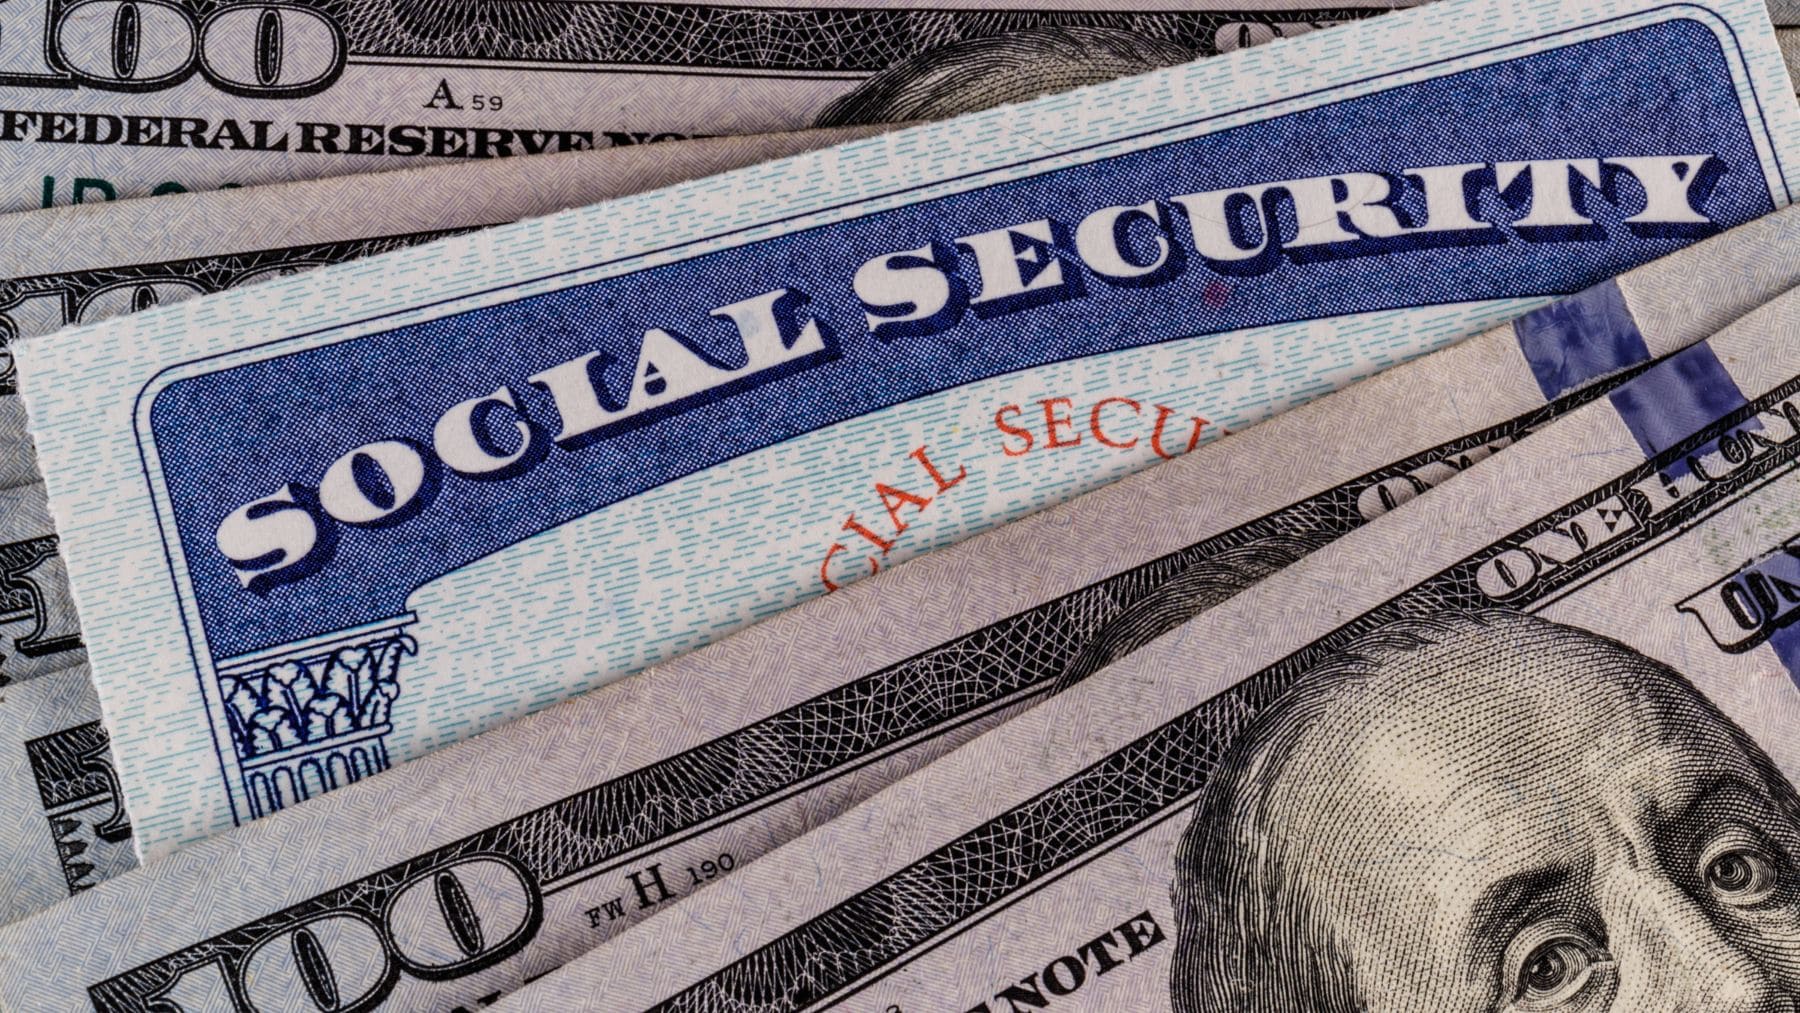 Social Security money and SSA Card